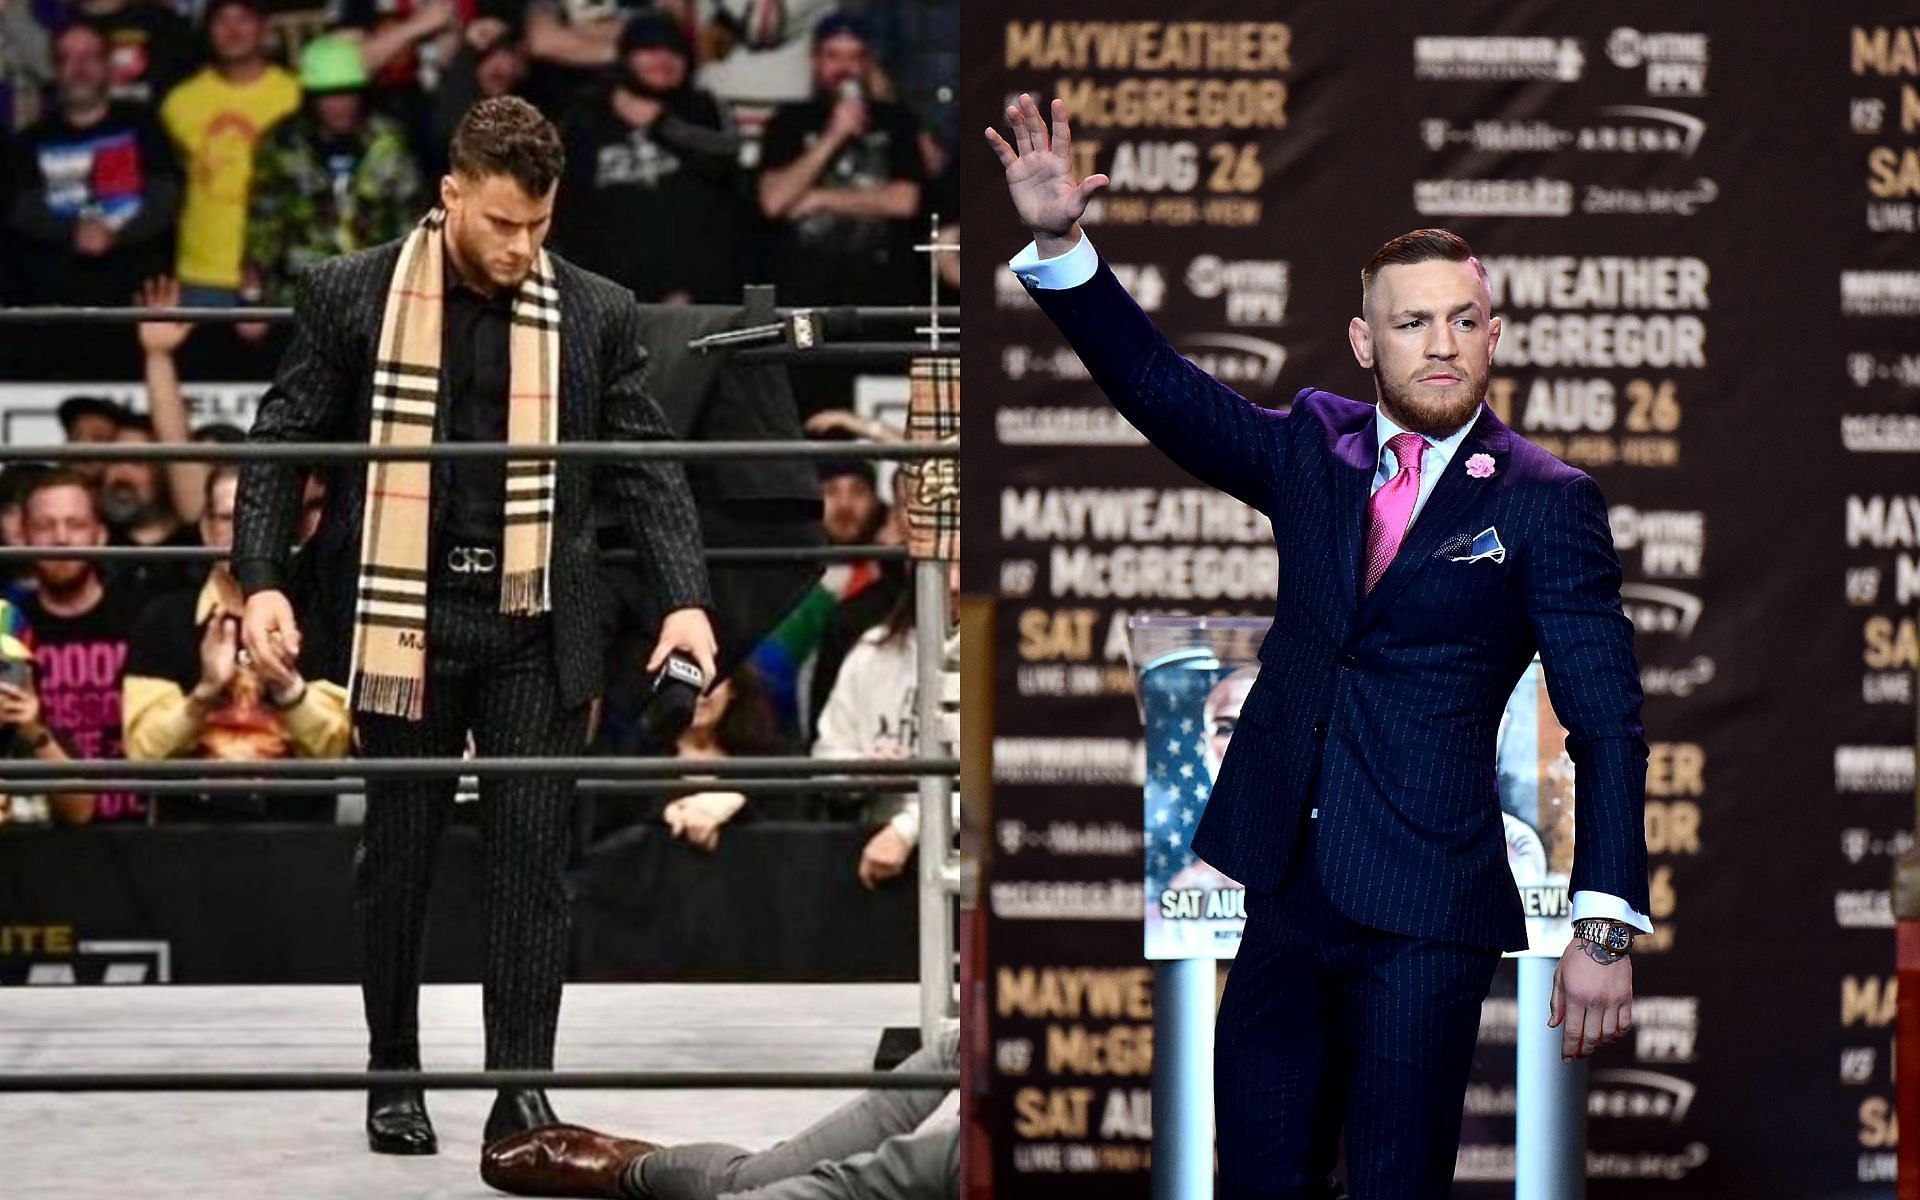 Maxwell Jacob Friedman (left) and Conor Mcgregor (right) [Image Courtesy: Getty Images and @the_mjf on Instagram]